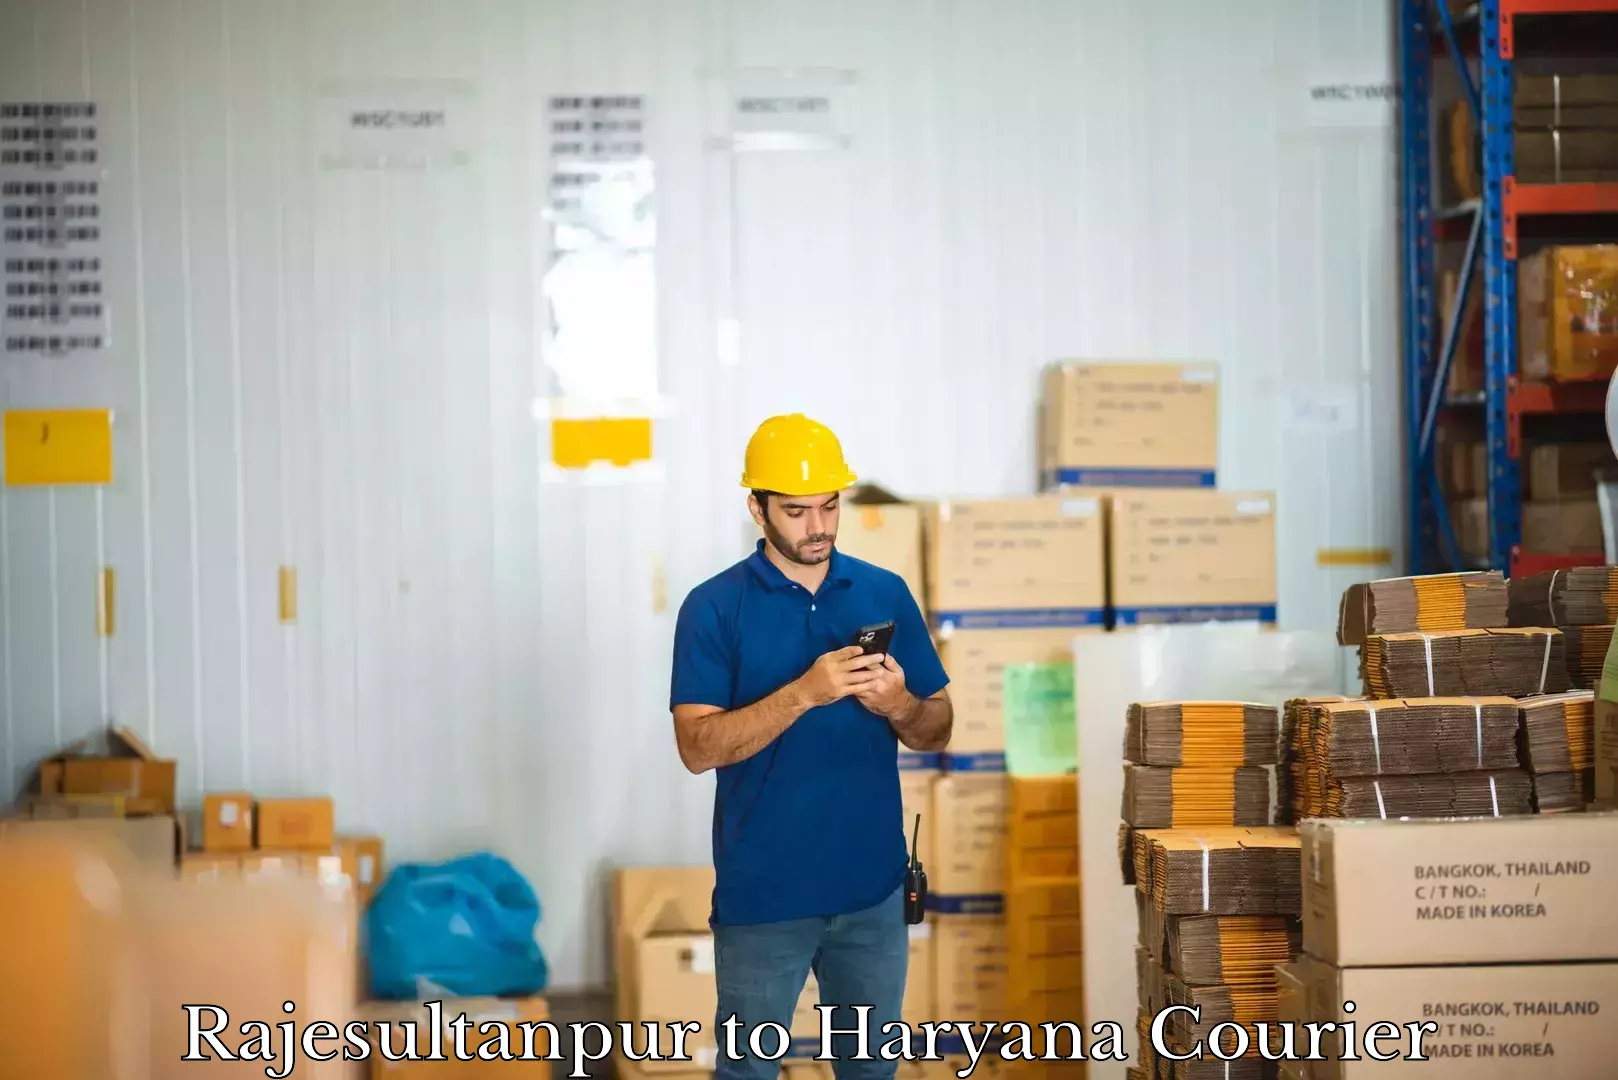 Group luggage shipping in Rajesultanpur to NCR Haryana